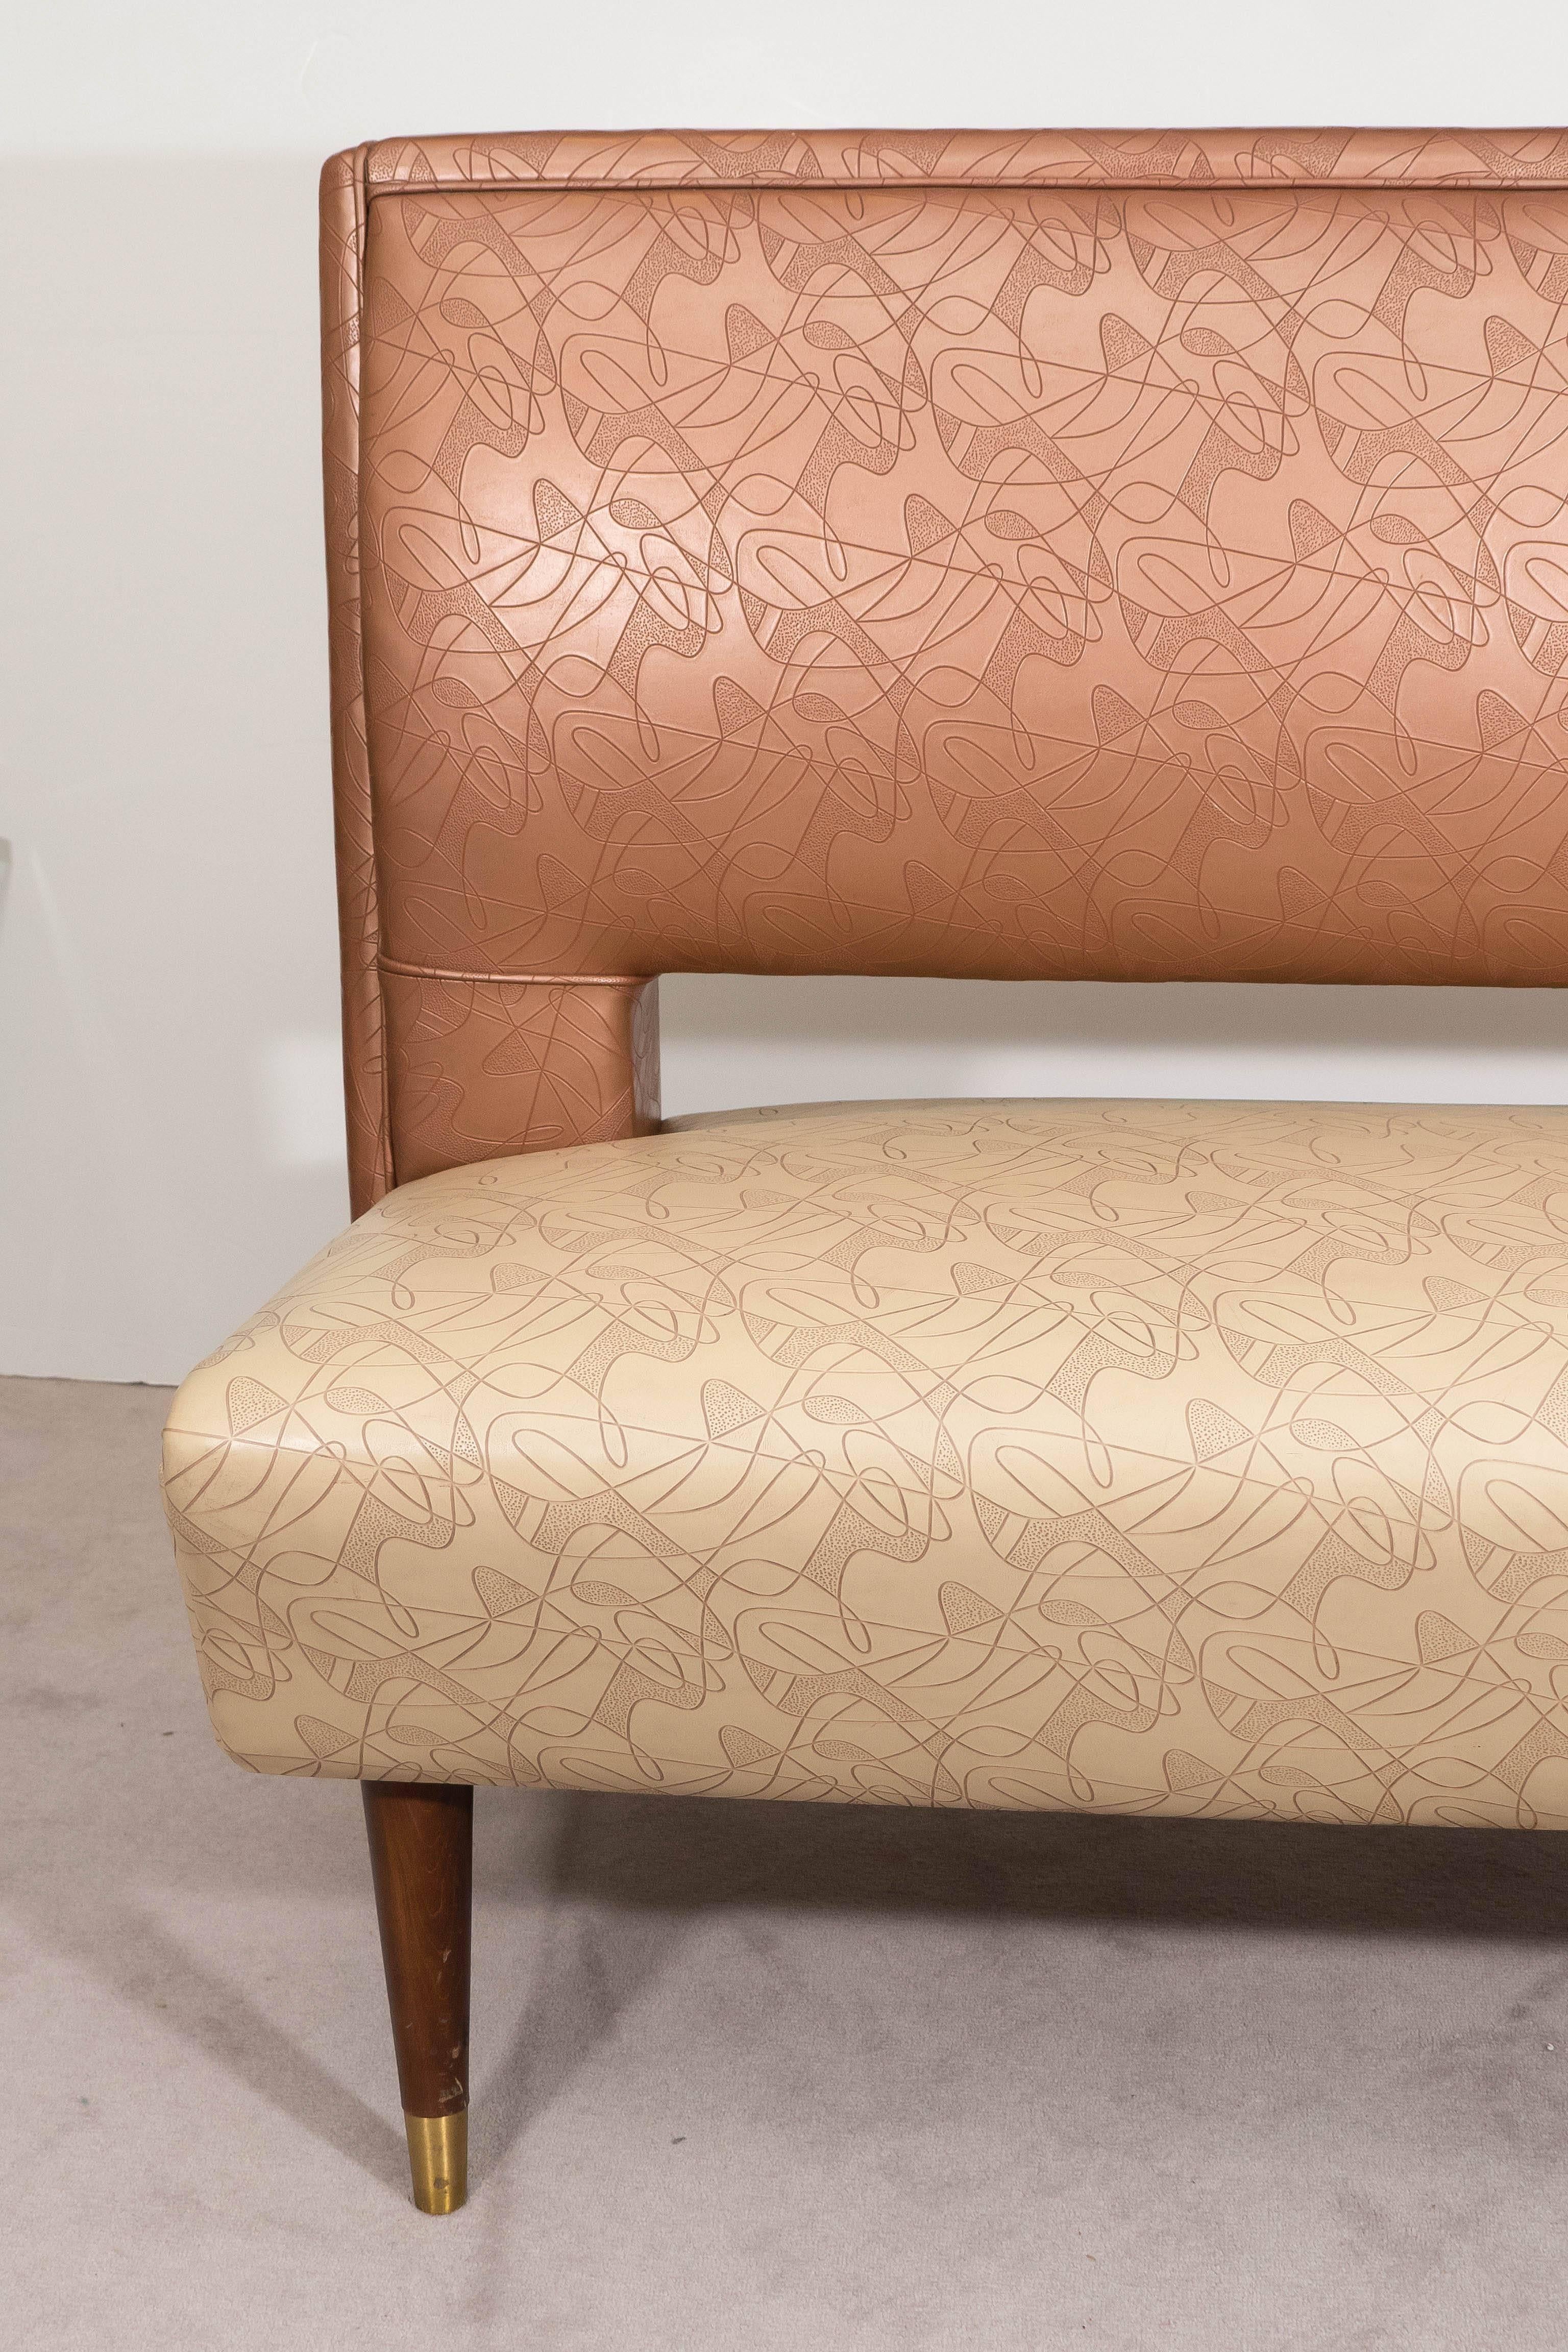 A settee or banquette circa 1950s, manufactured by the Brody Seating Company of Chicago, Illinois, upholstered in vinyl, the back and seat in tones of copper and beige, impressed with Googie-style patterns, on tapered wood legs with brass sabots.